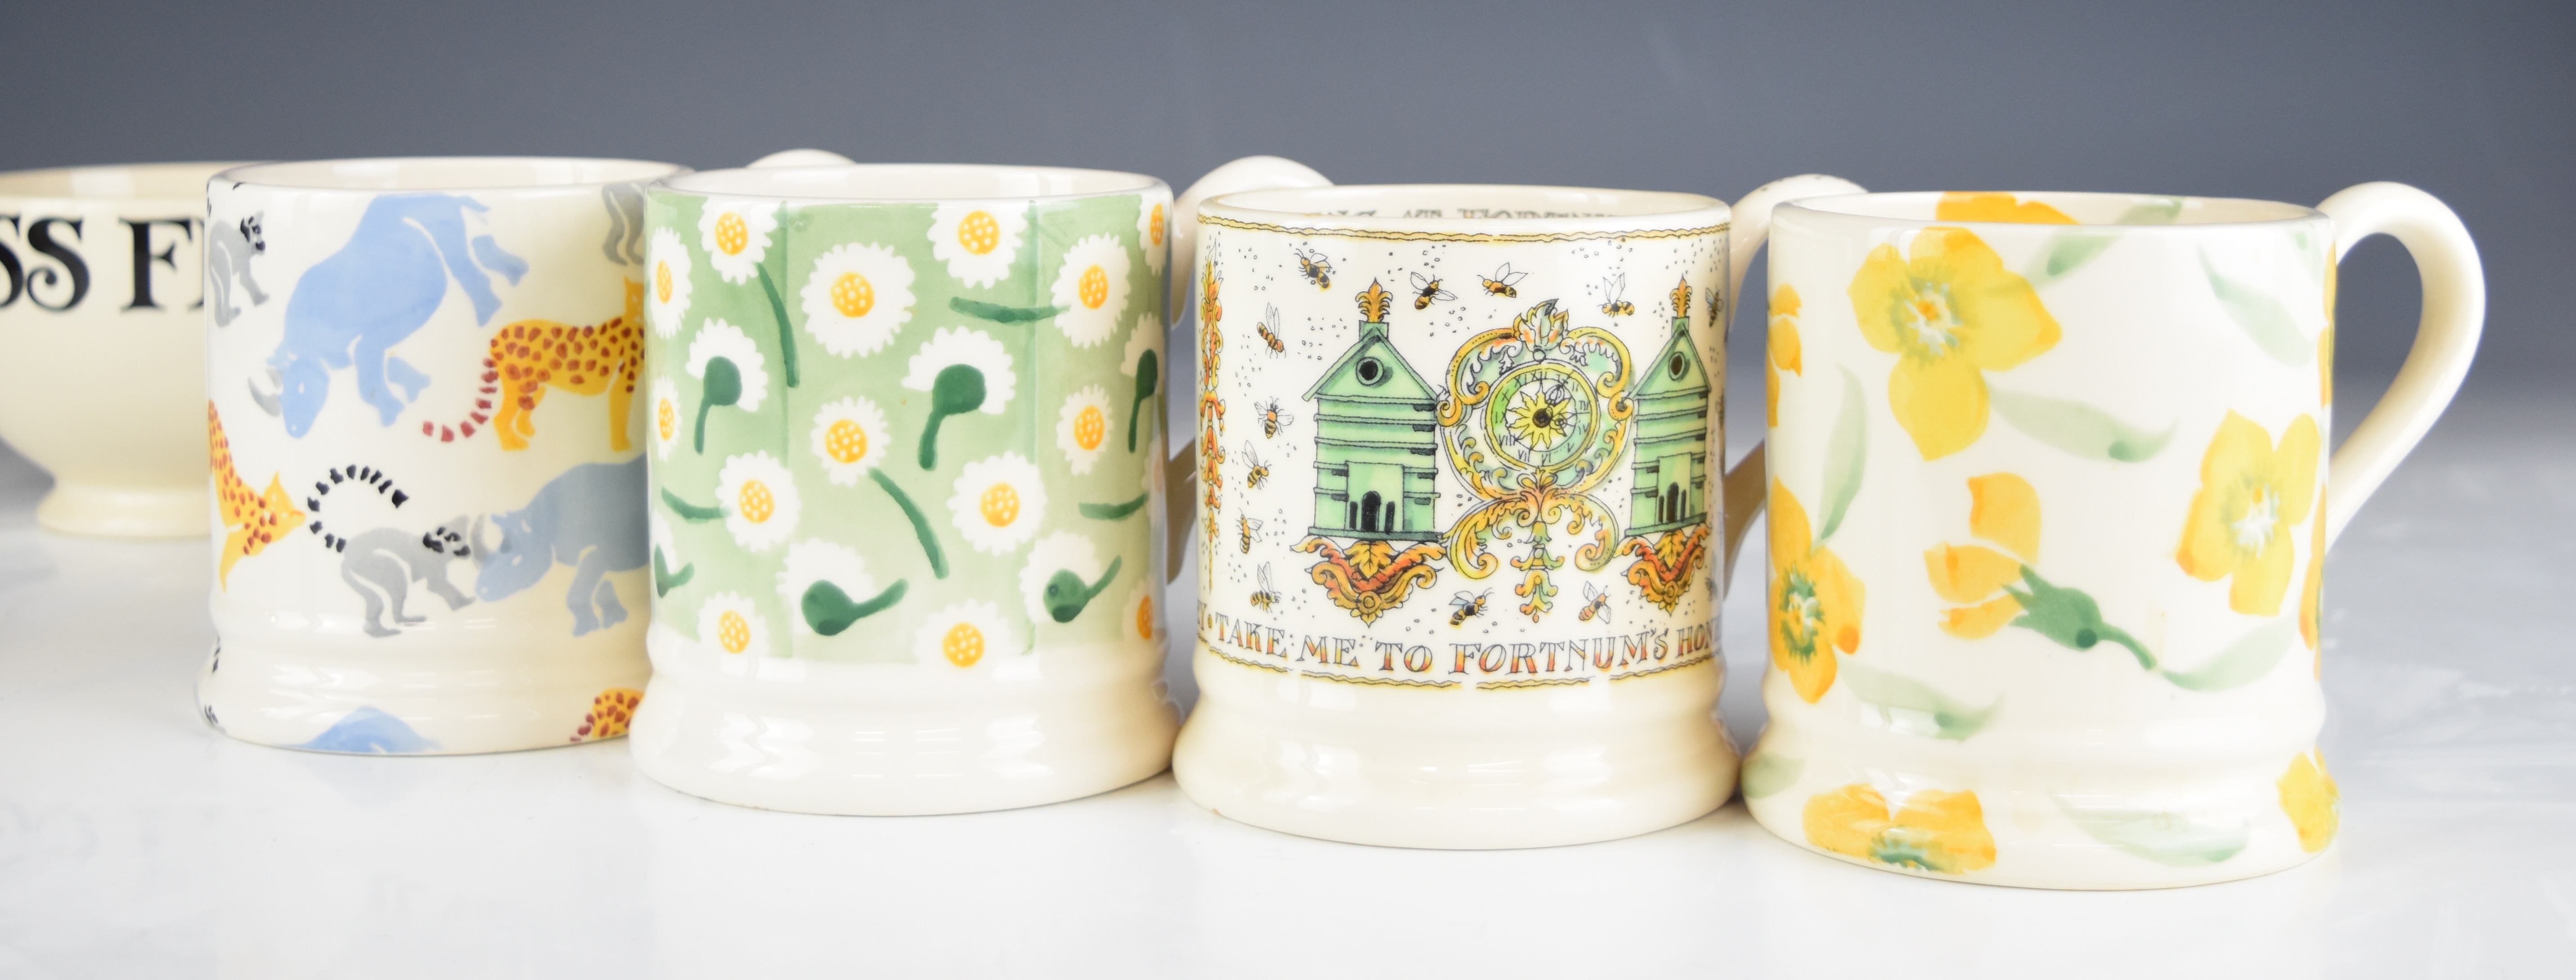 Emma Bridgewater ceramics including a tazza with pansy decoration, mugs, cups and saucers, glasses - Image 7 of 18